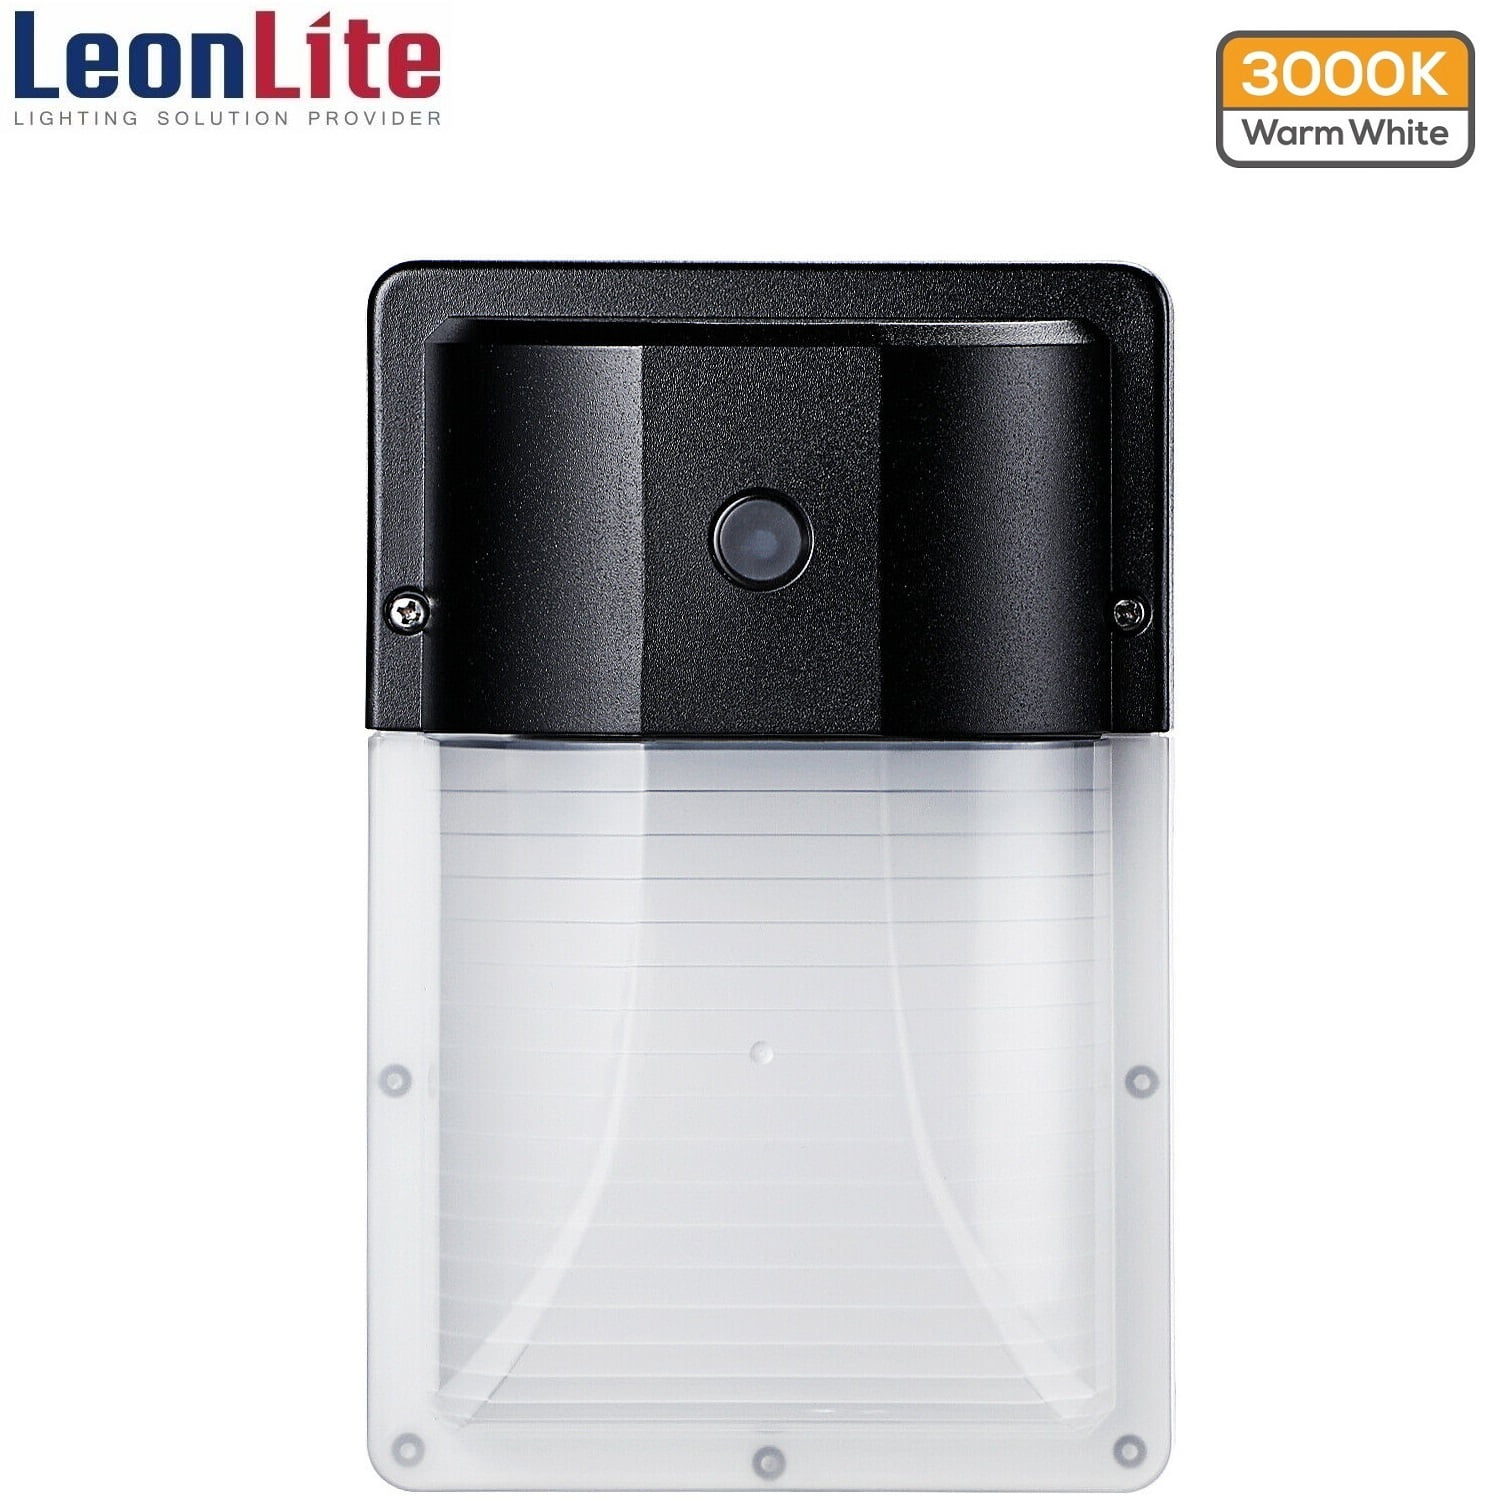 LEONLITE LED Wall Pack Light with Photocell, Outdoor Security Area Exterior  Lights, 3000K Warm White